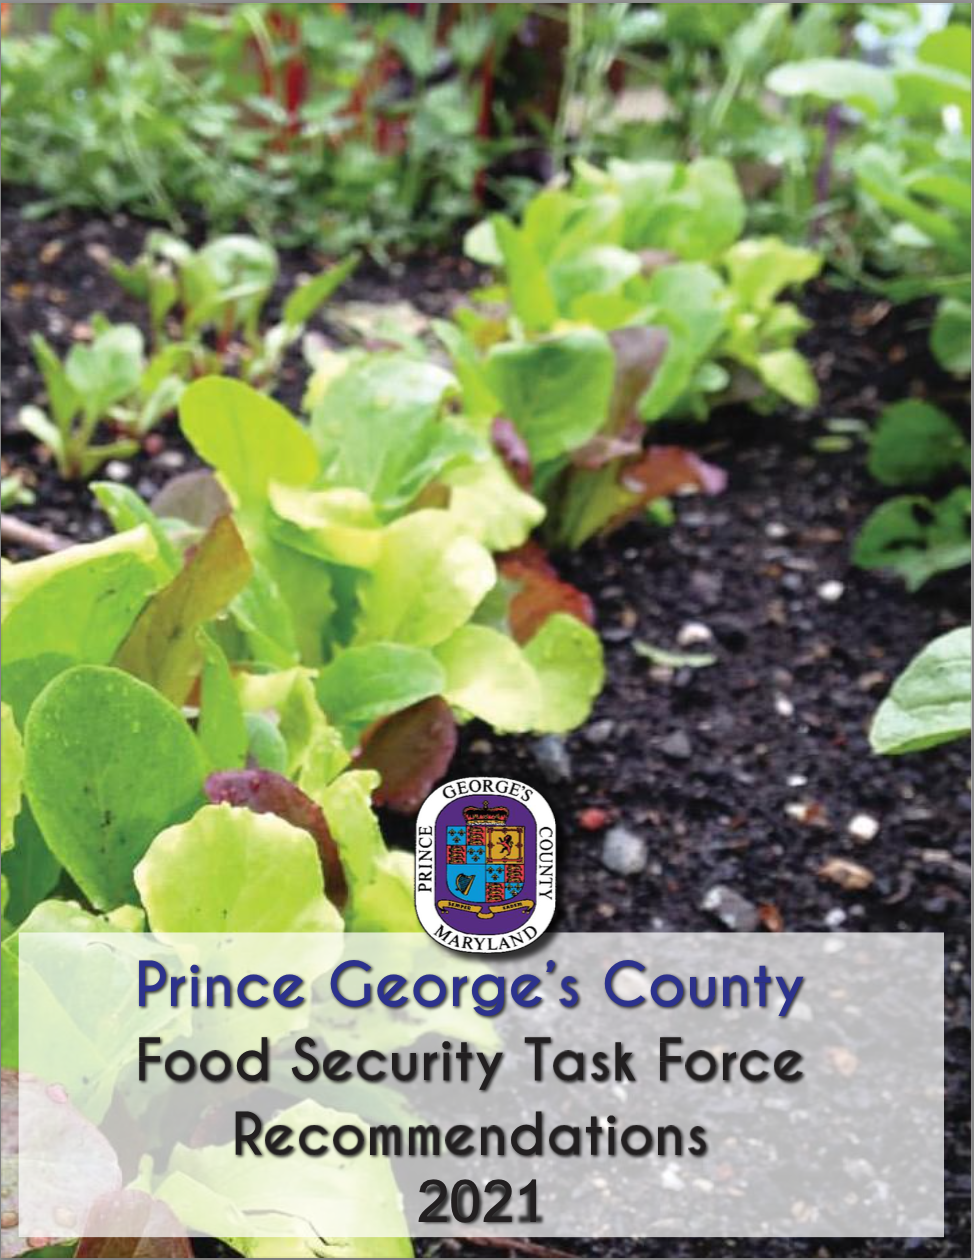 Title "Prince George's County Food Security Task Force Recommendations 2021" over a background image of crops growing from the ground.